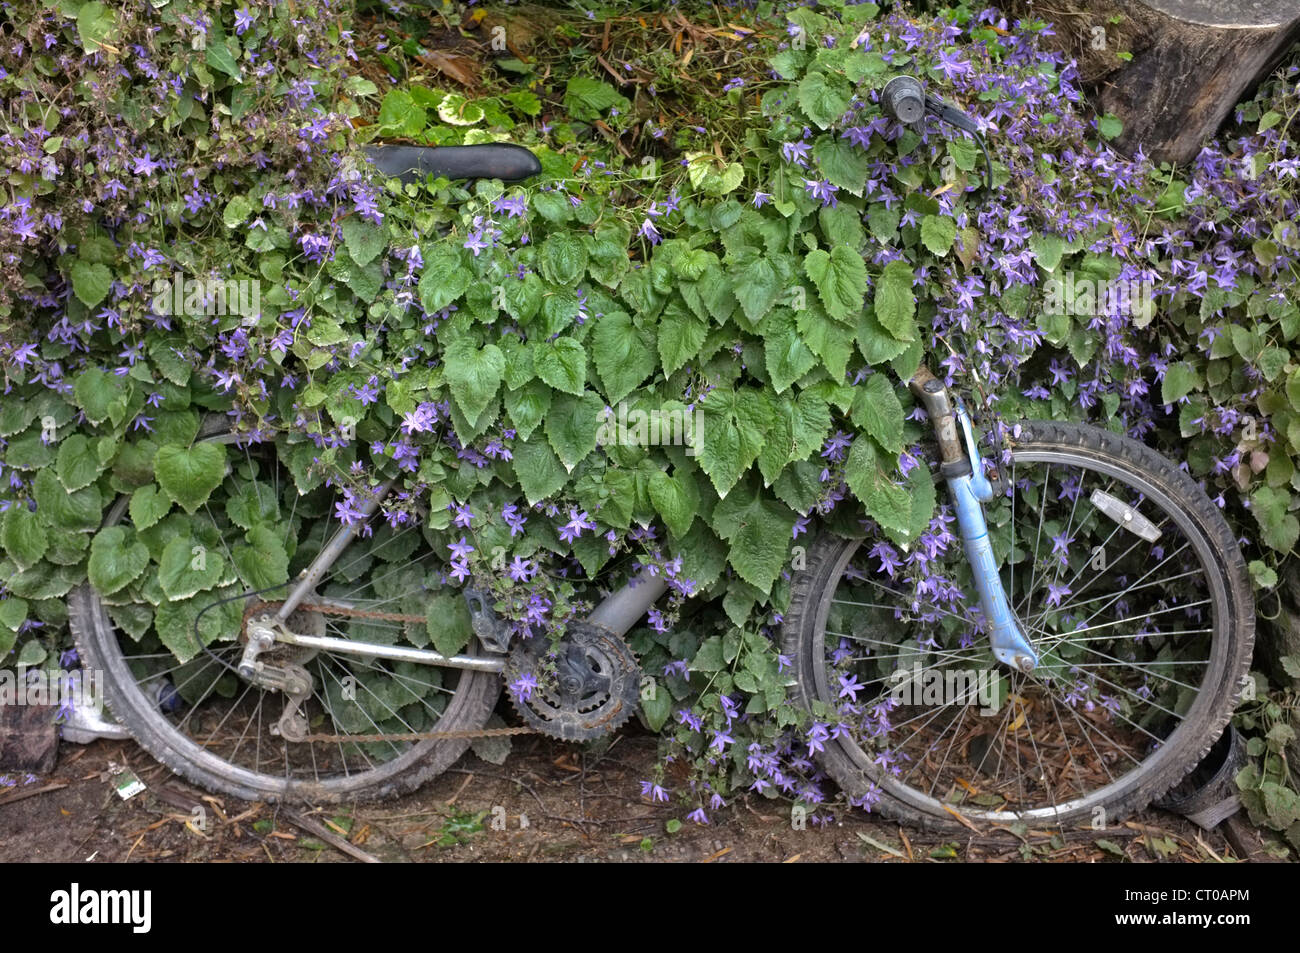 A disused bicycle overgrown by foliage Stock Photo